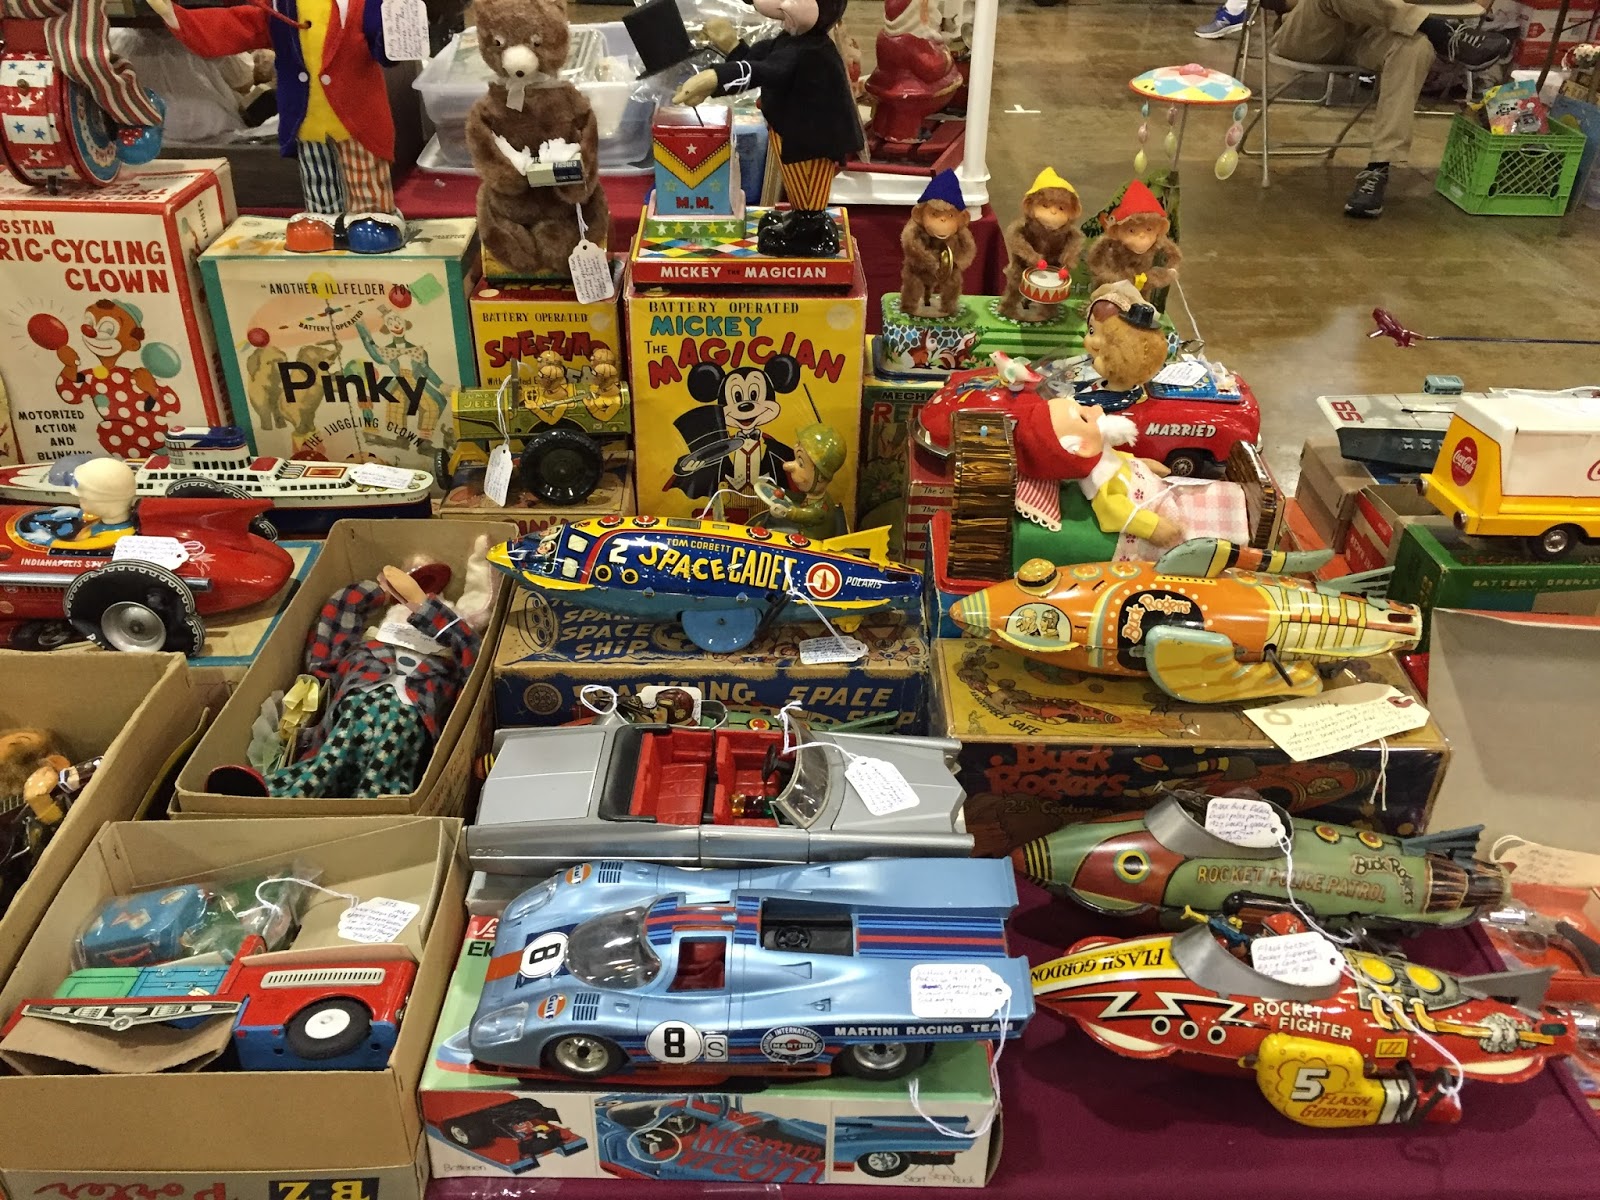 Martin Grams: The Value of Antique Toy Shows